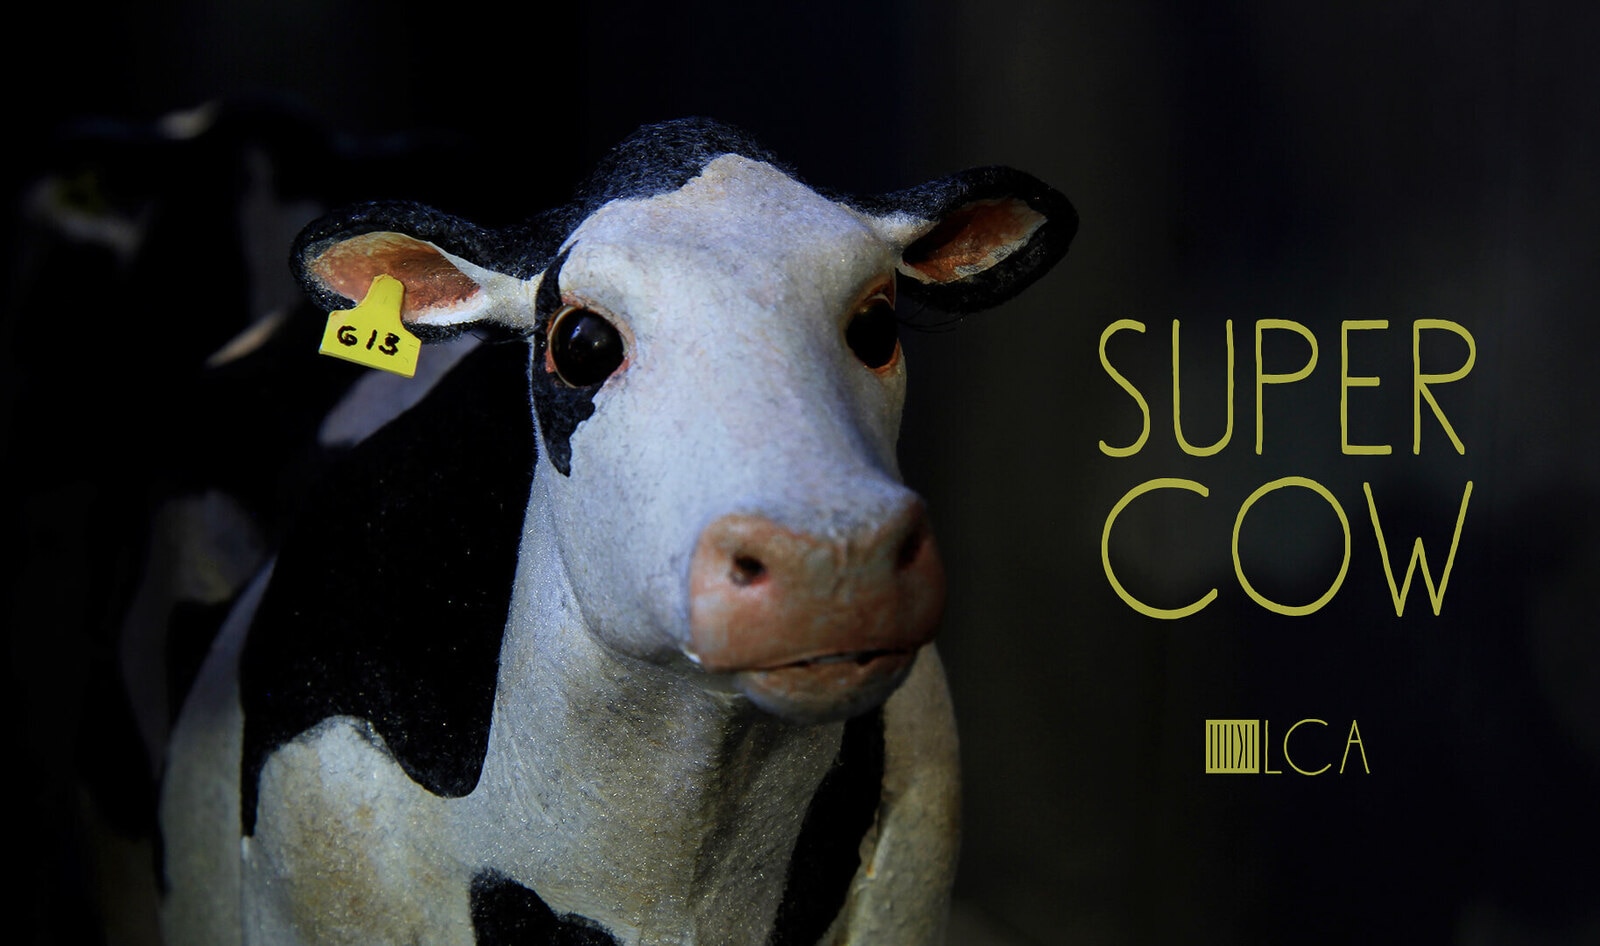 Are Animals Individuals or Statistics? New Short Film 'Super Cow' Connects the Dots.